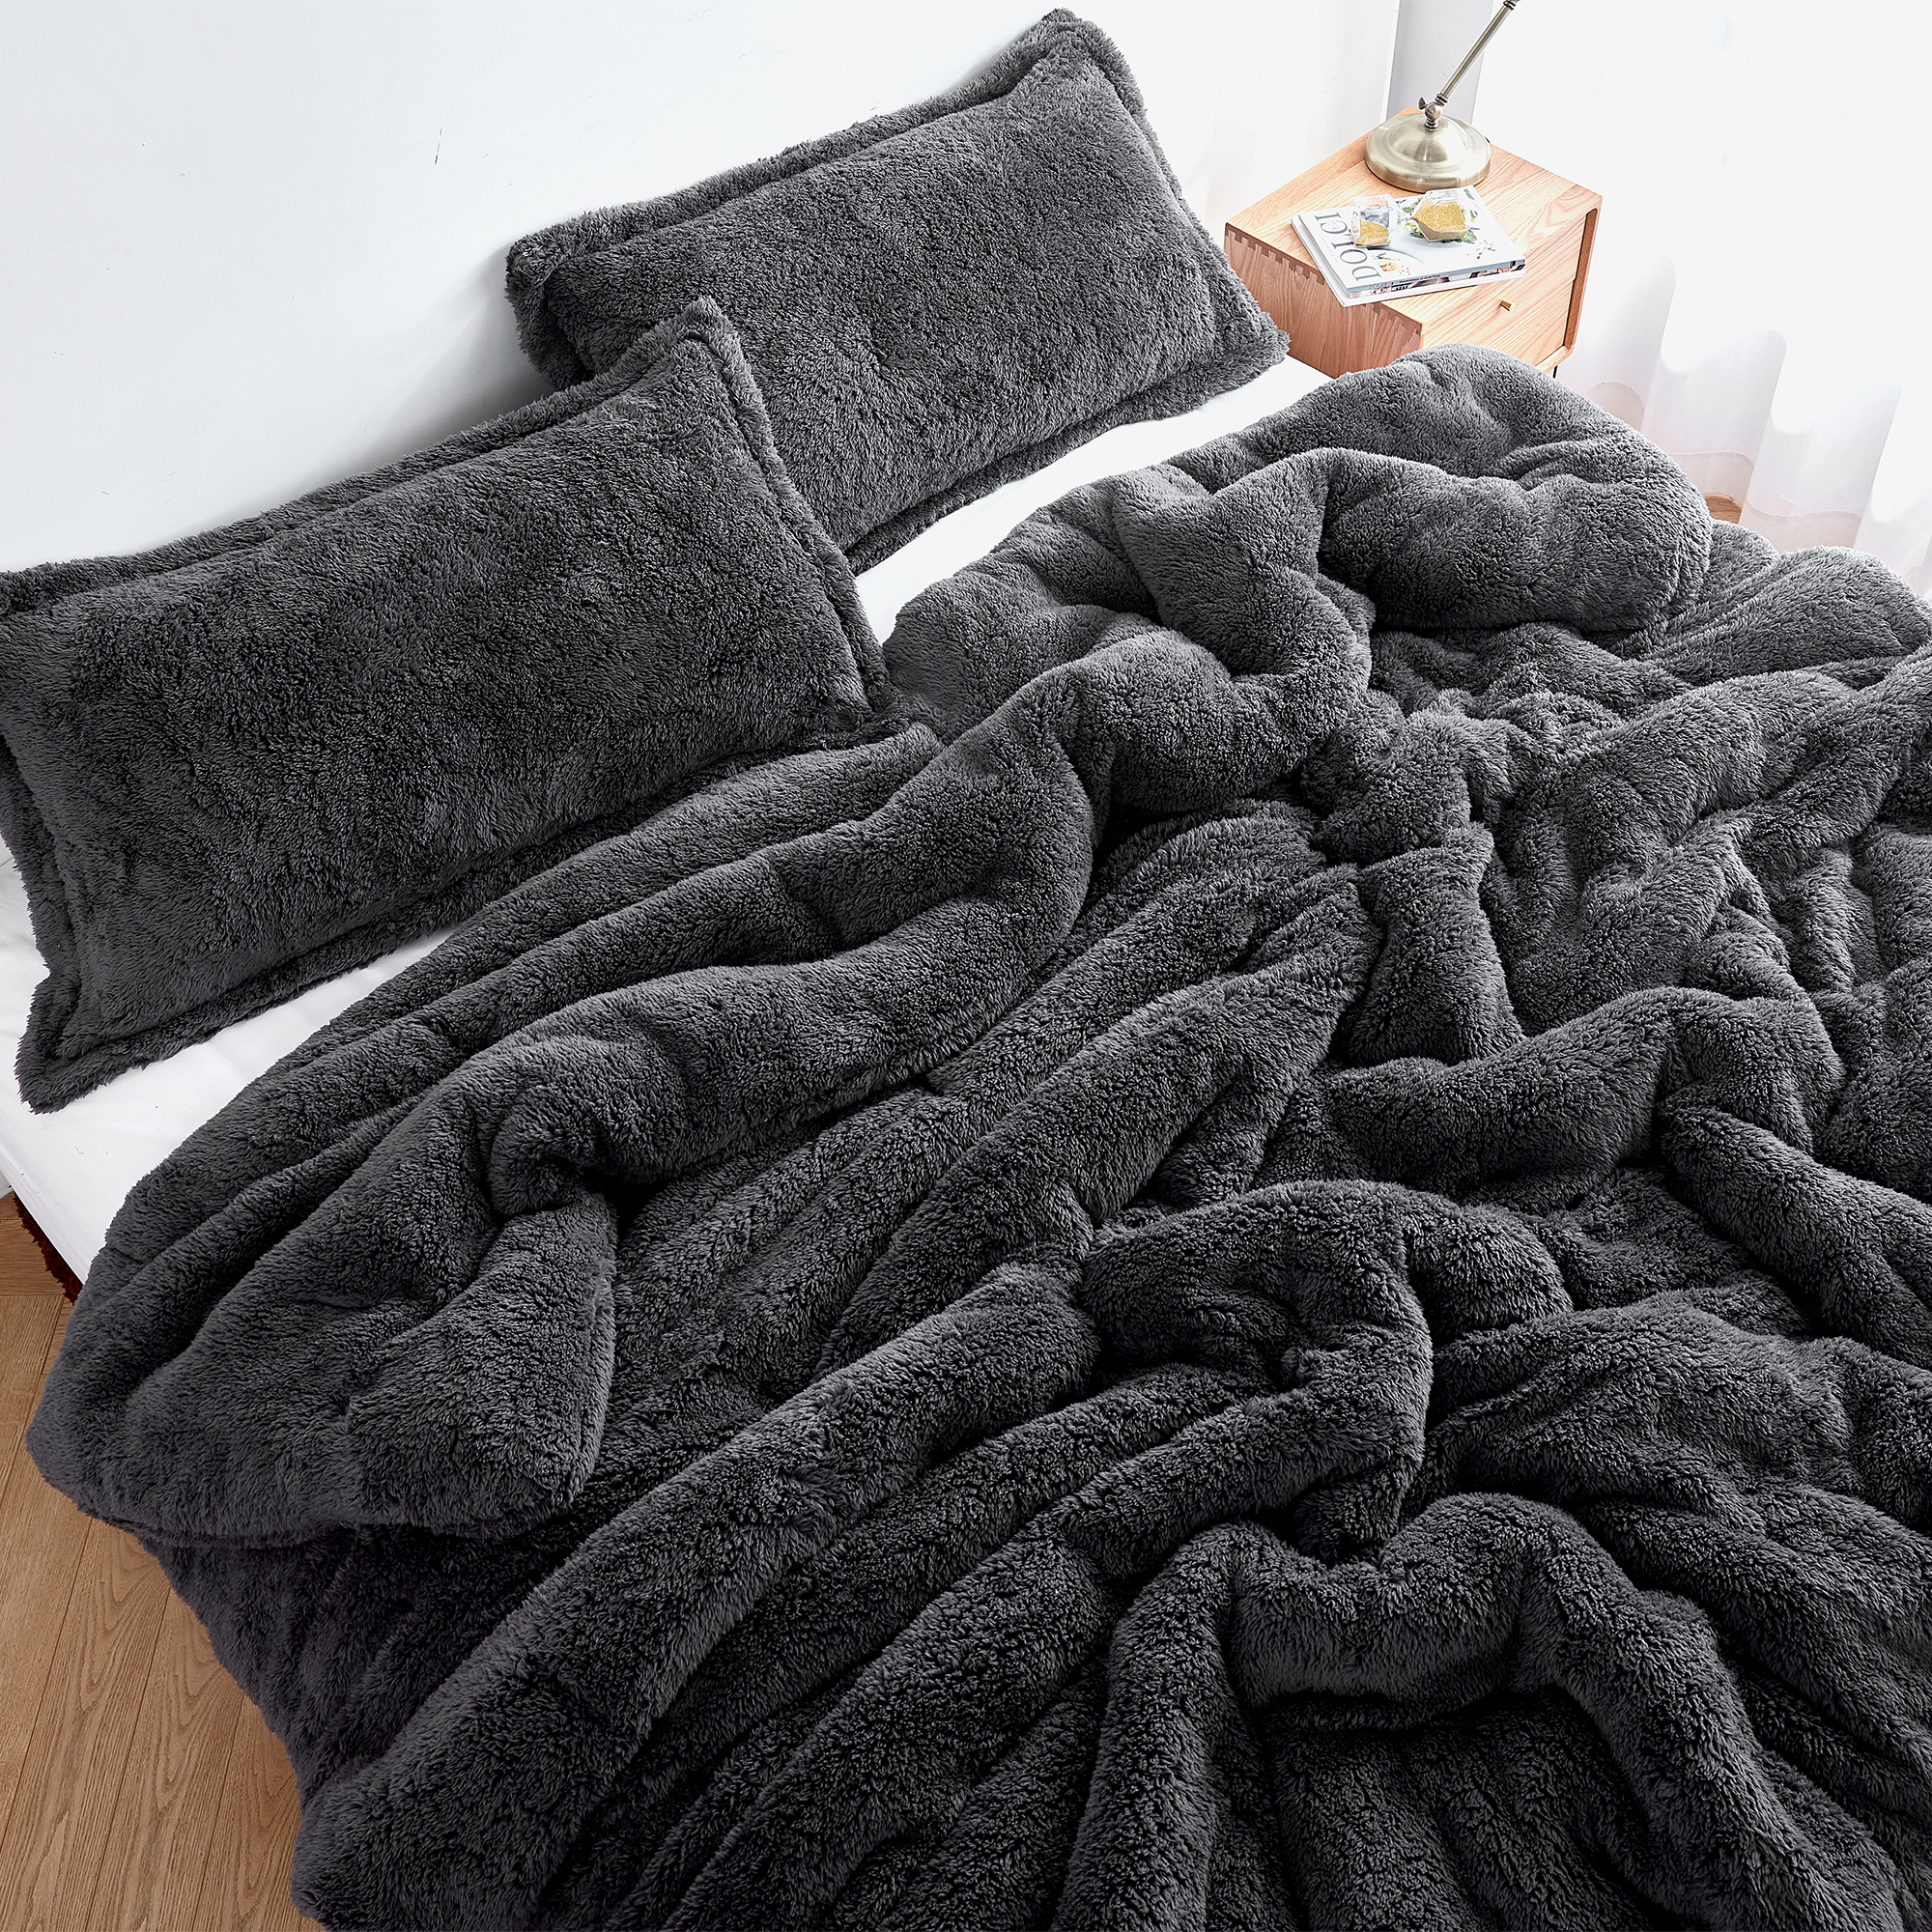 Coma Inducer Comforter  - Charcoal - Oversized Bedding